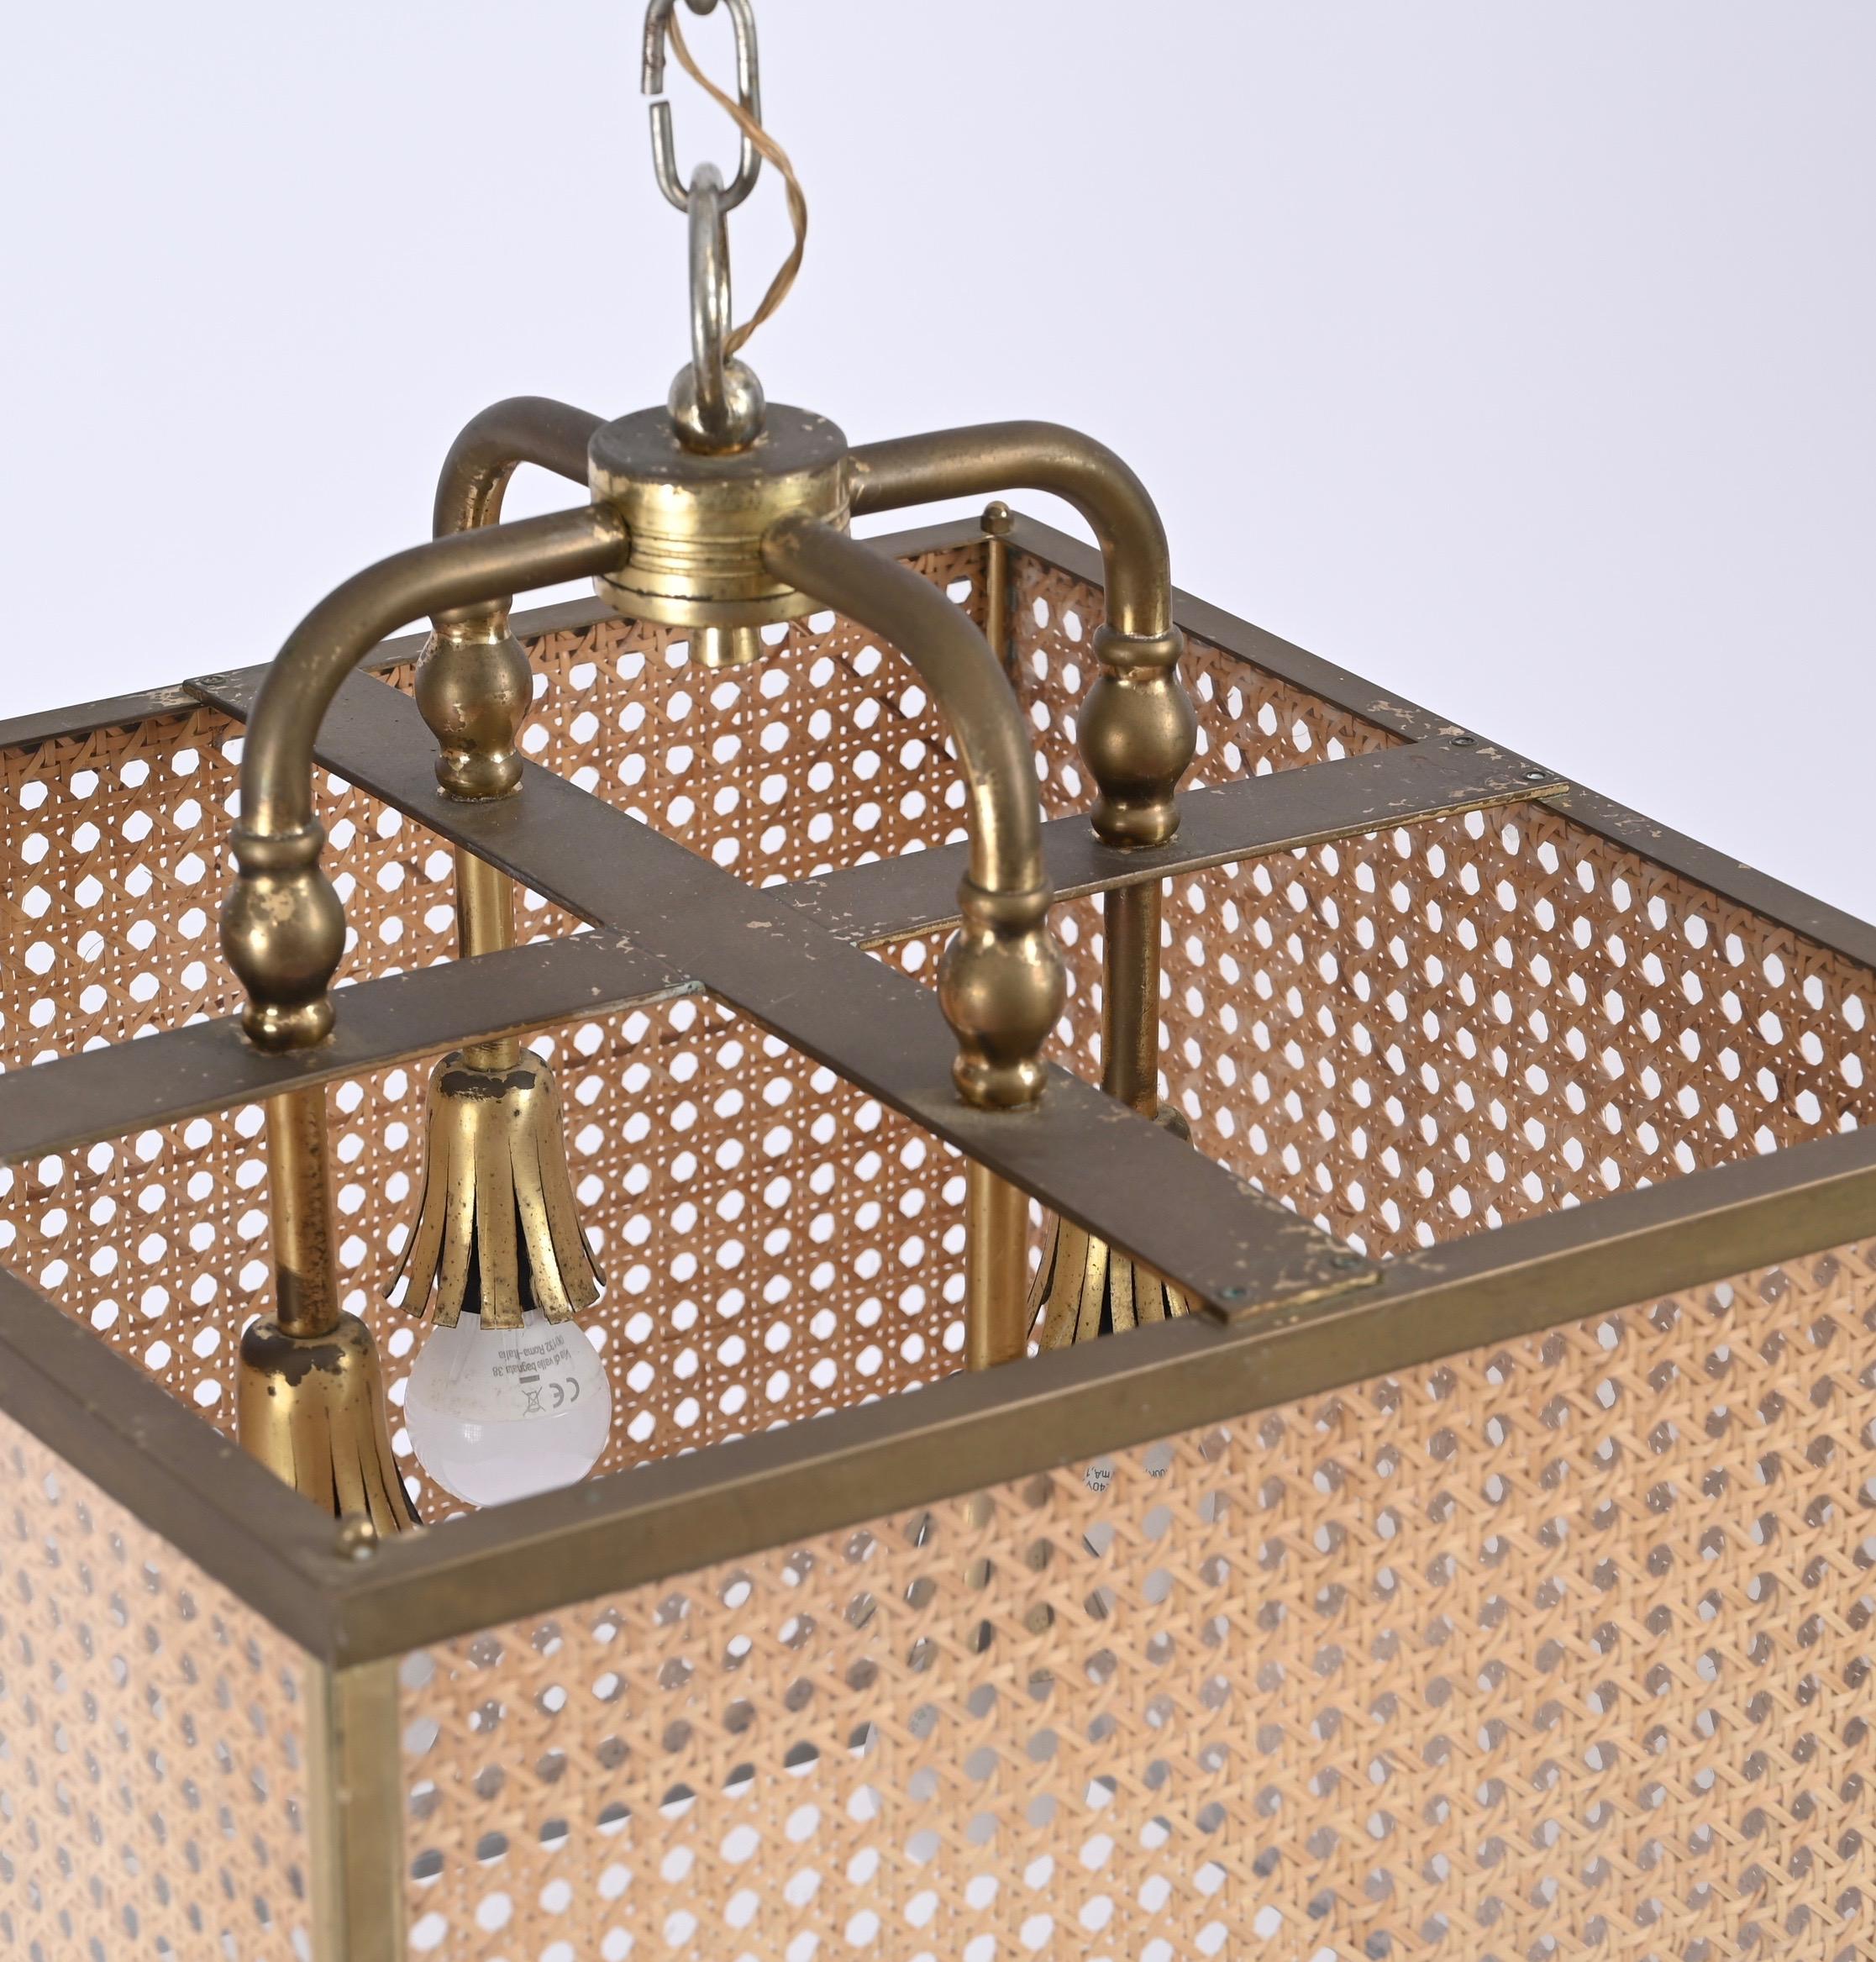 20th Century Brass, Vienna Straw Wicker and Glass Square Chandelier Lamp, Italy, 1950s For Sale